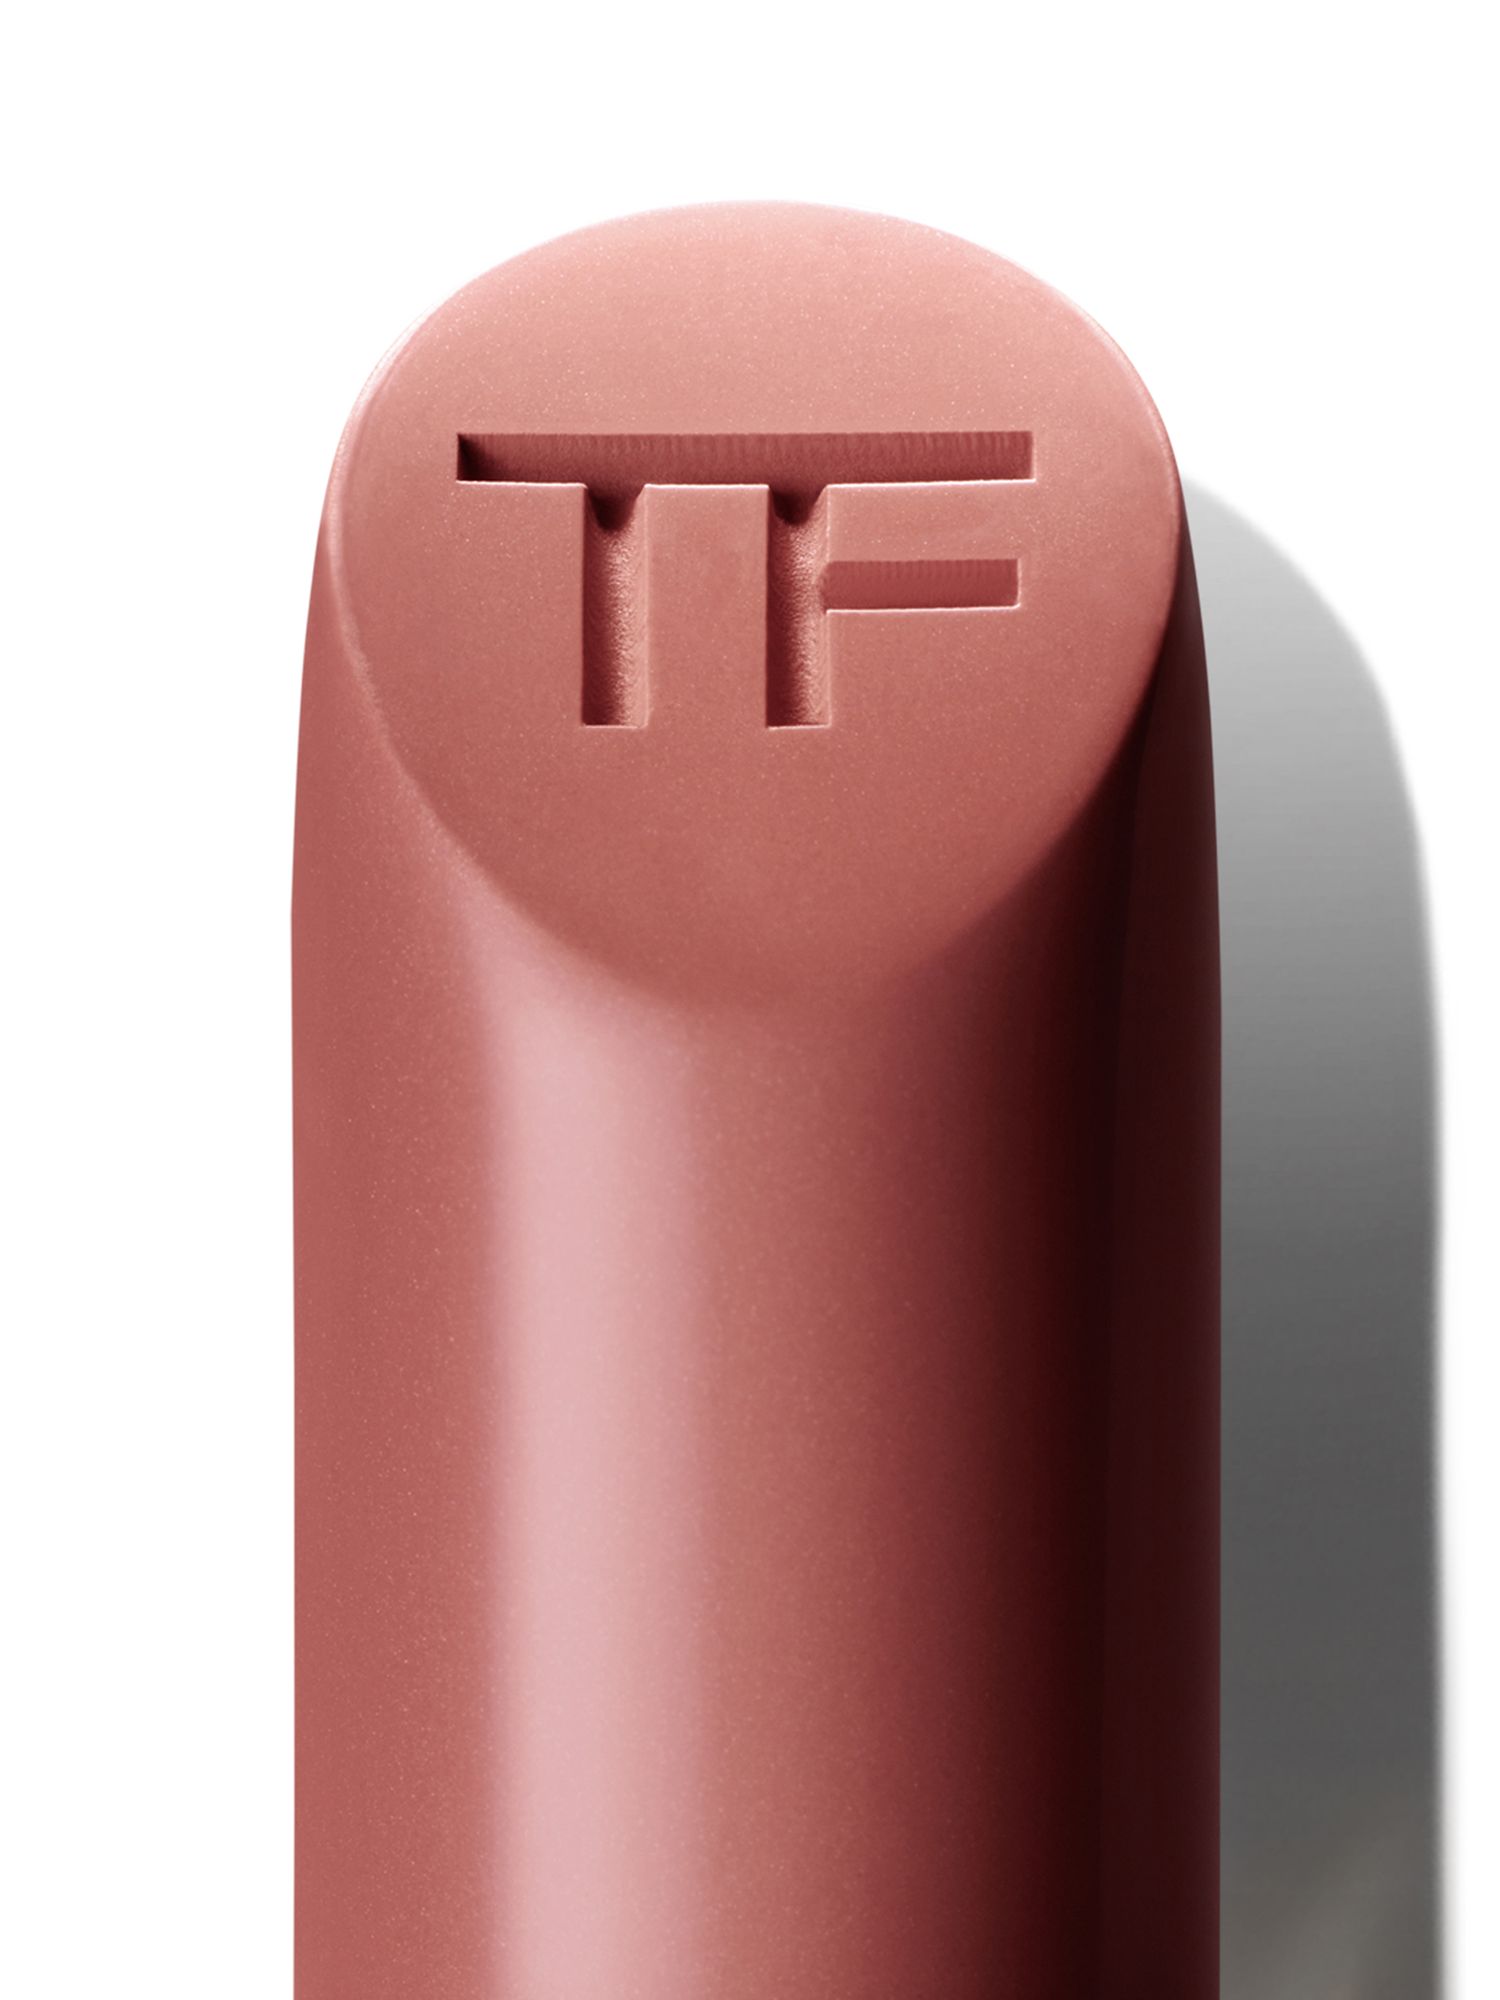 TOM FORD Lip Colour, Indian Rose at John Lewis & Partners